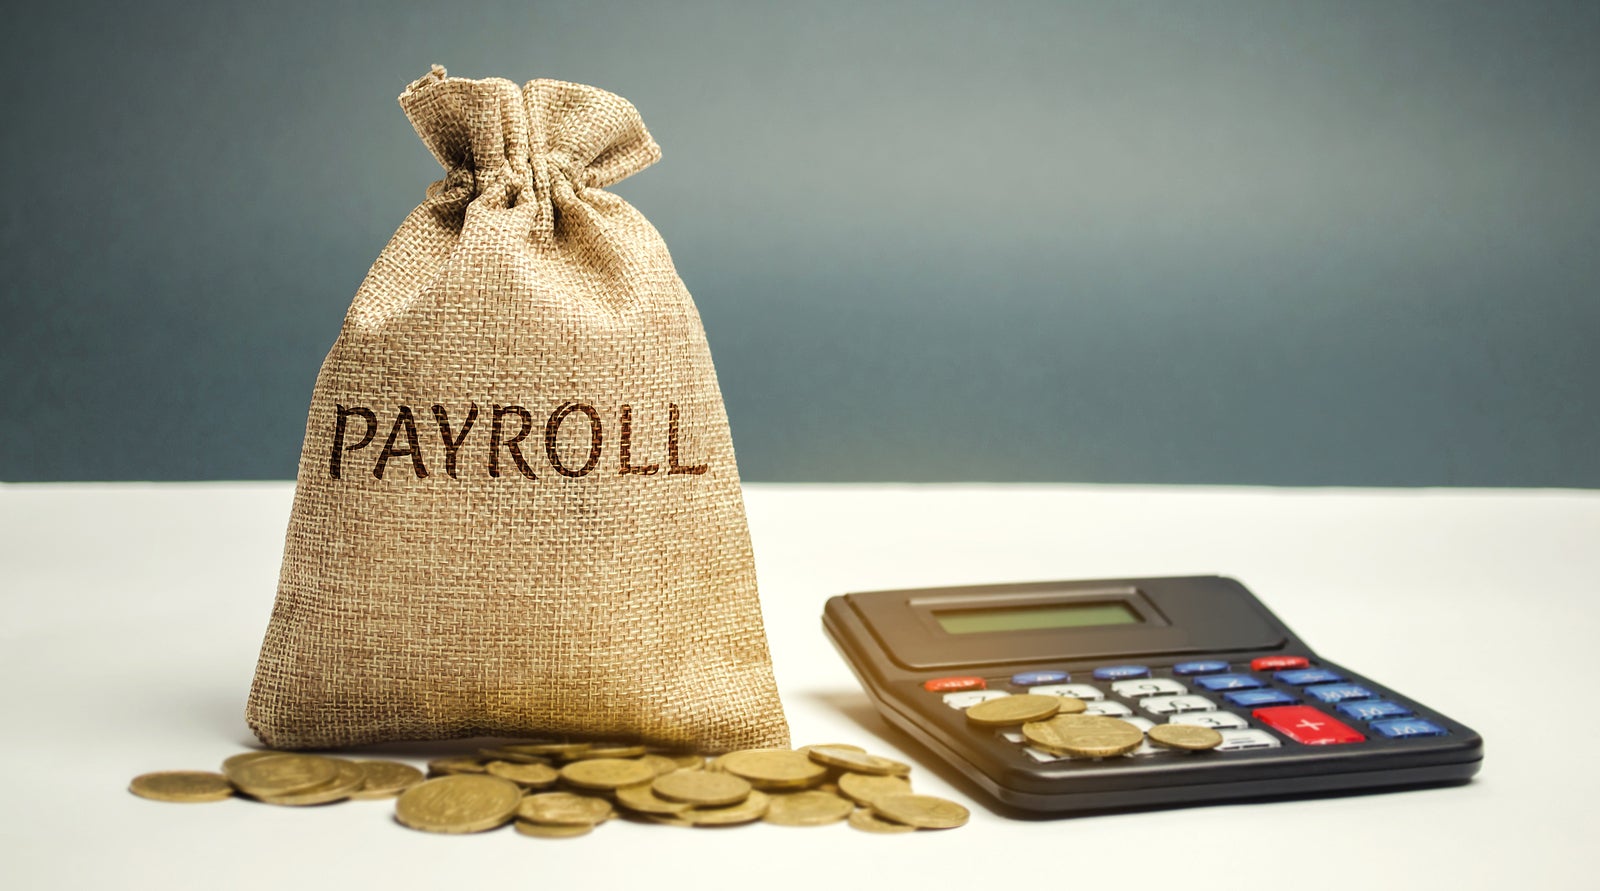 Money bag with the word Payroll and calculator. Payroll is the sum total of all compensation a business must pay to its employees for a set period of time or on a given date. Taxes. Management